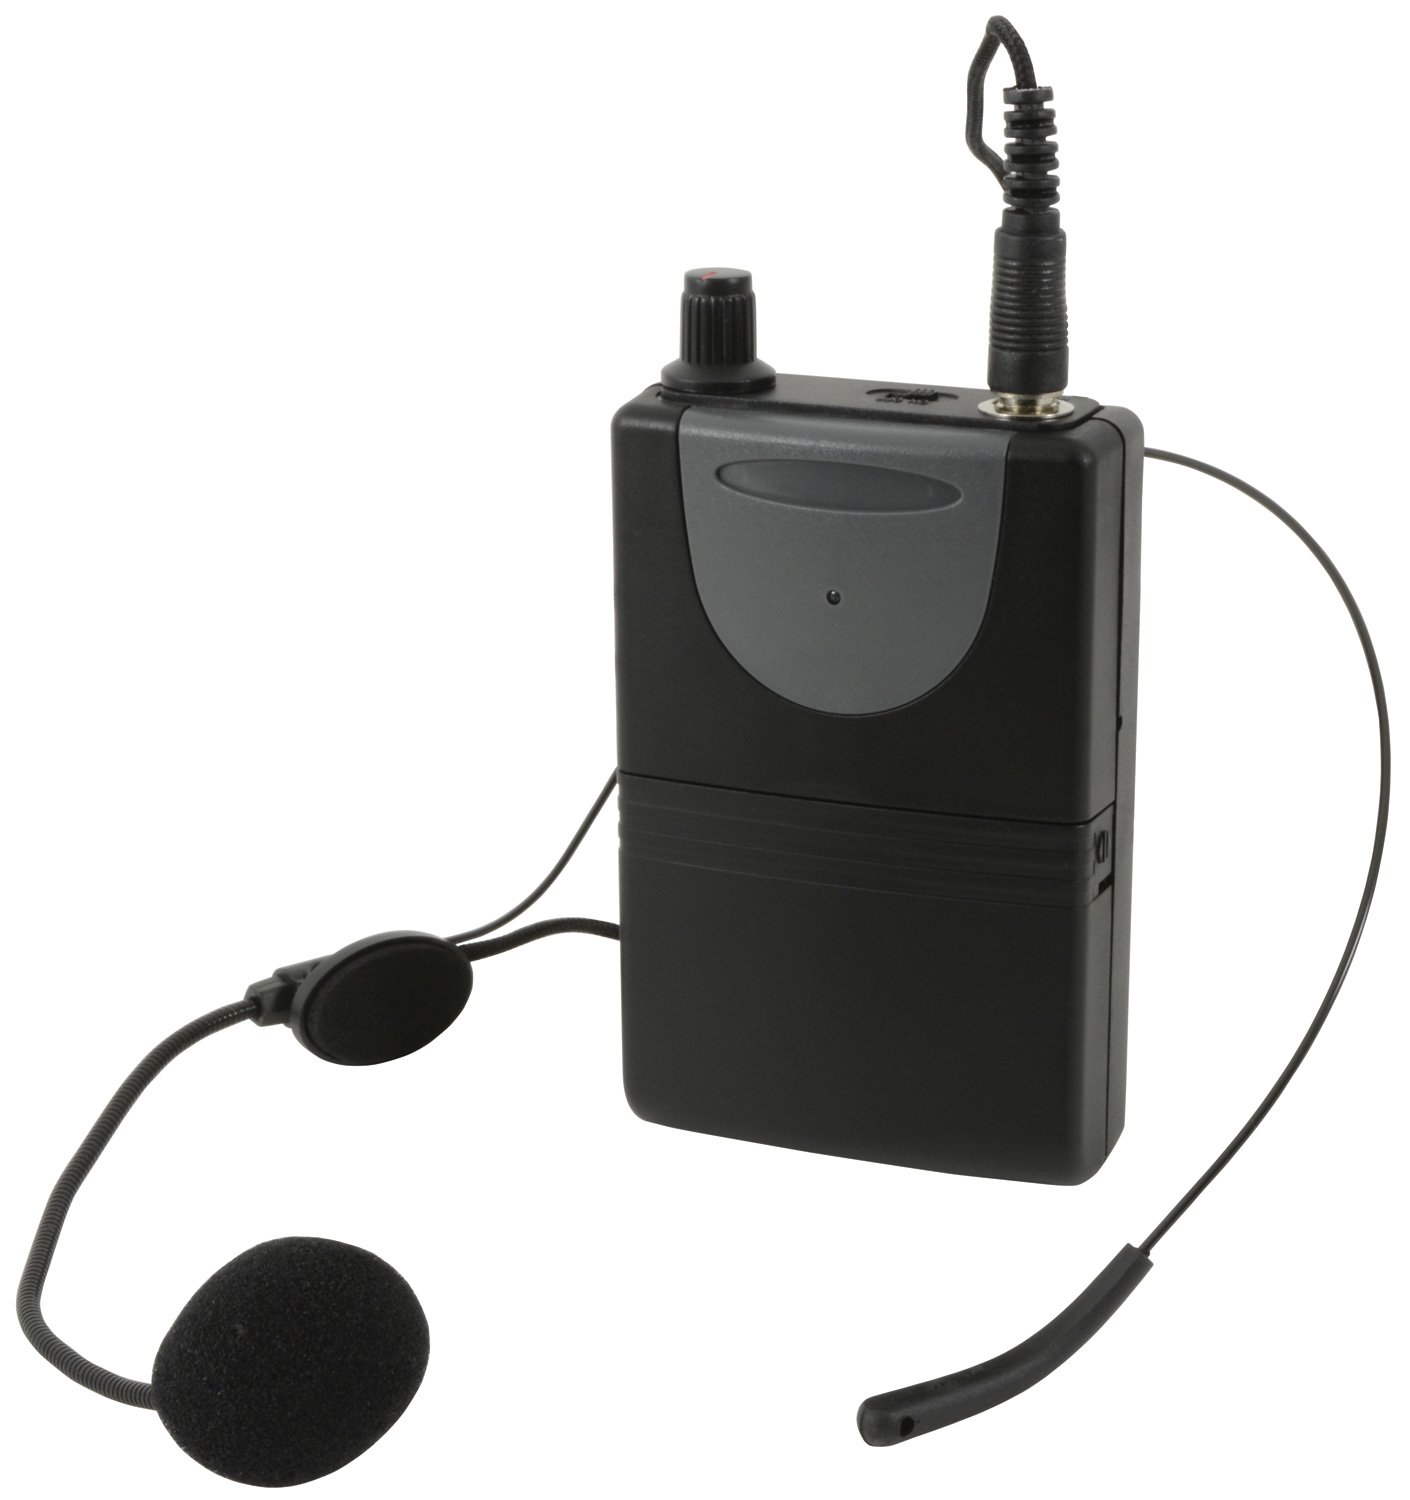 Neckband Mic + Beltpack for QRPA & QXPA Headset for QR+QXPA - 174.1MHz